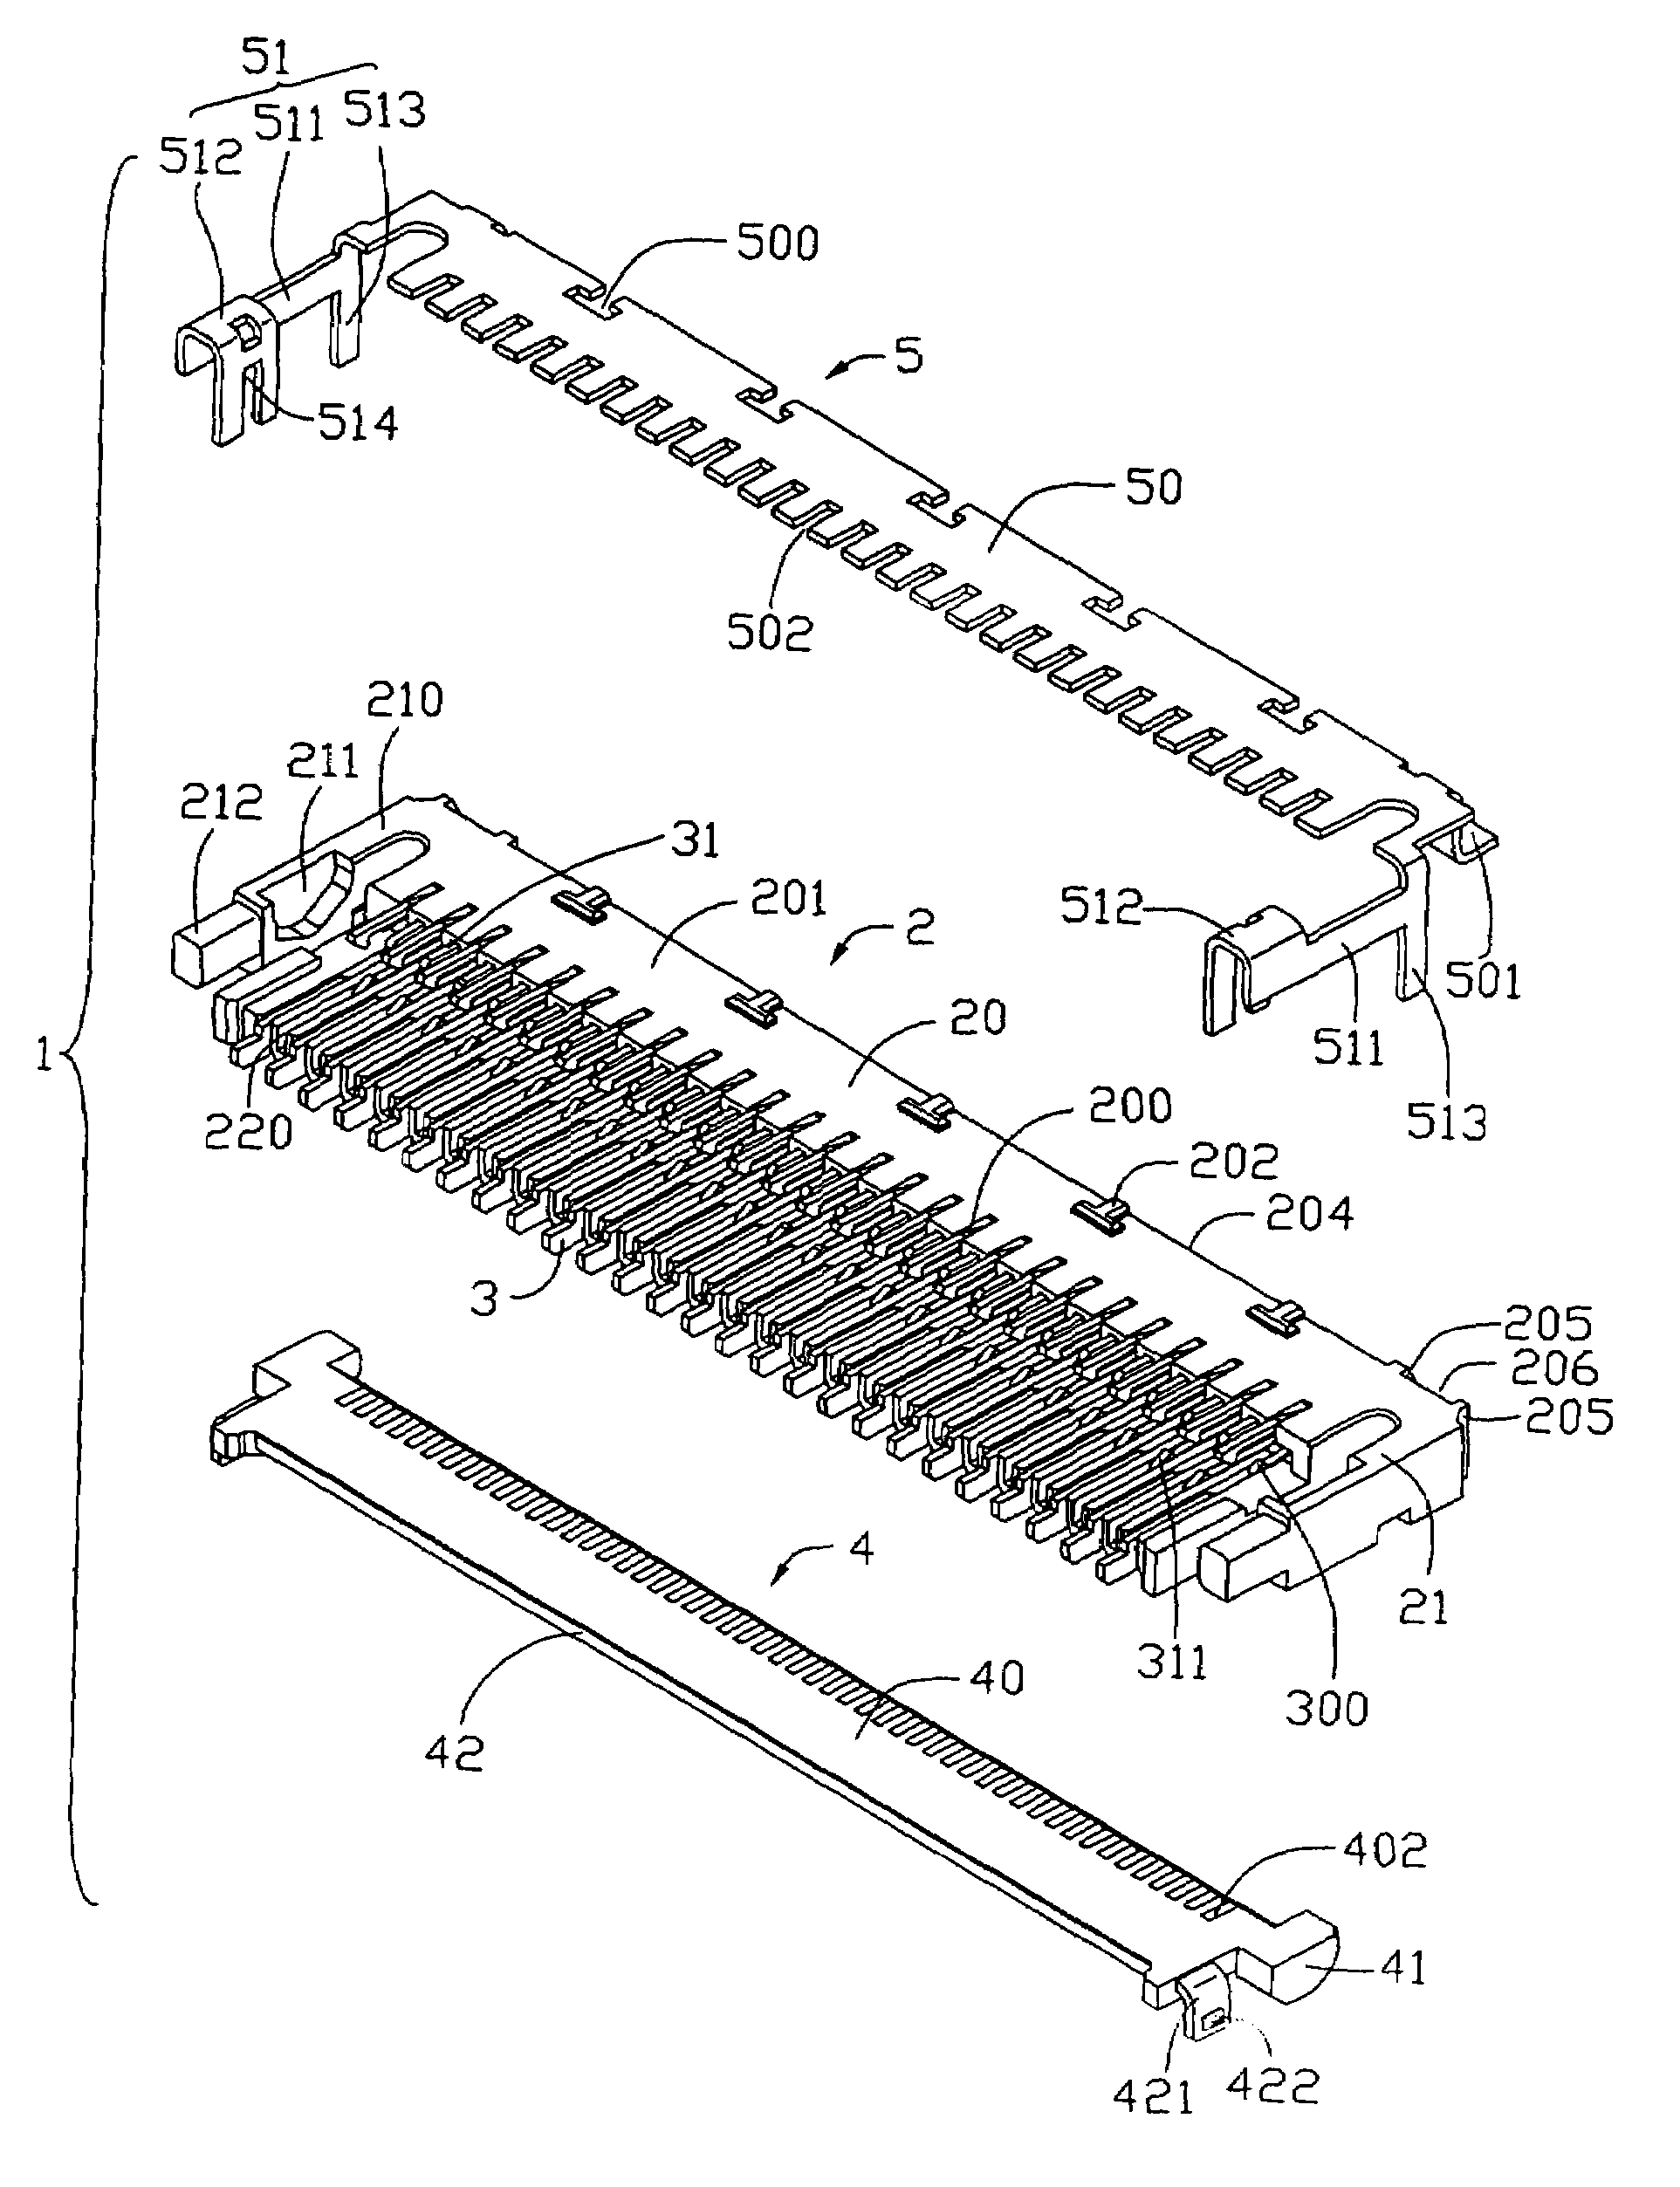 Electrical connector for use with flexible printed circuit